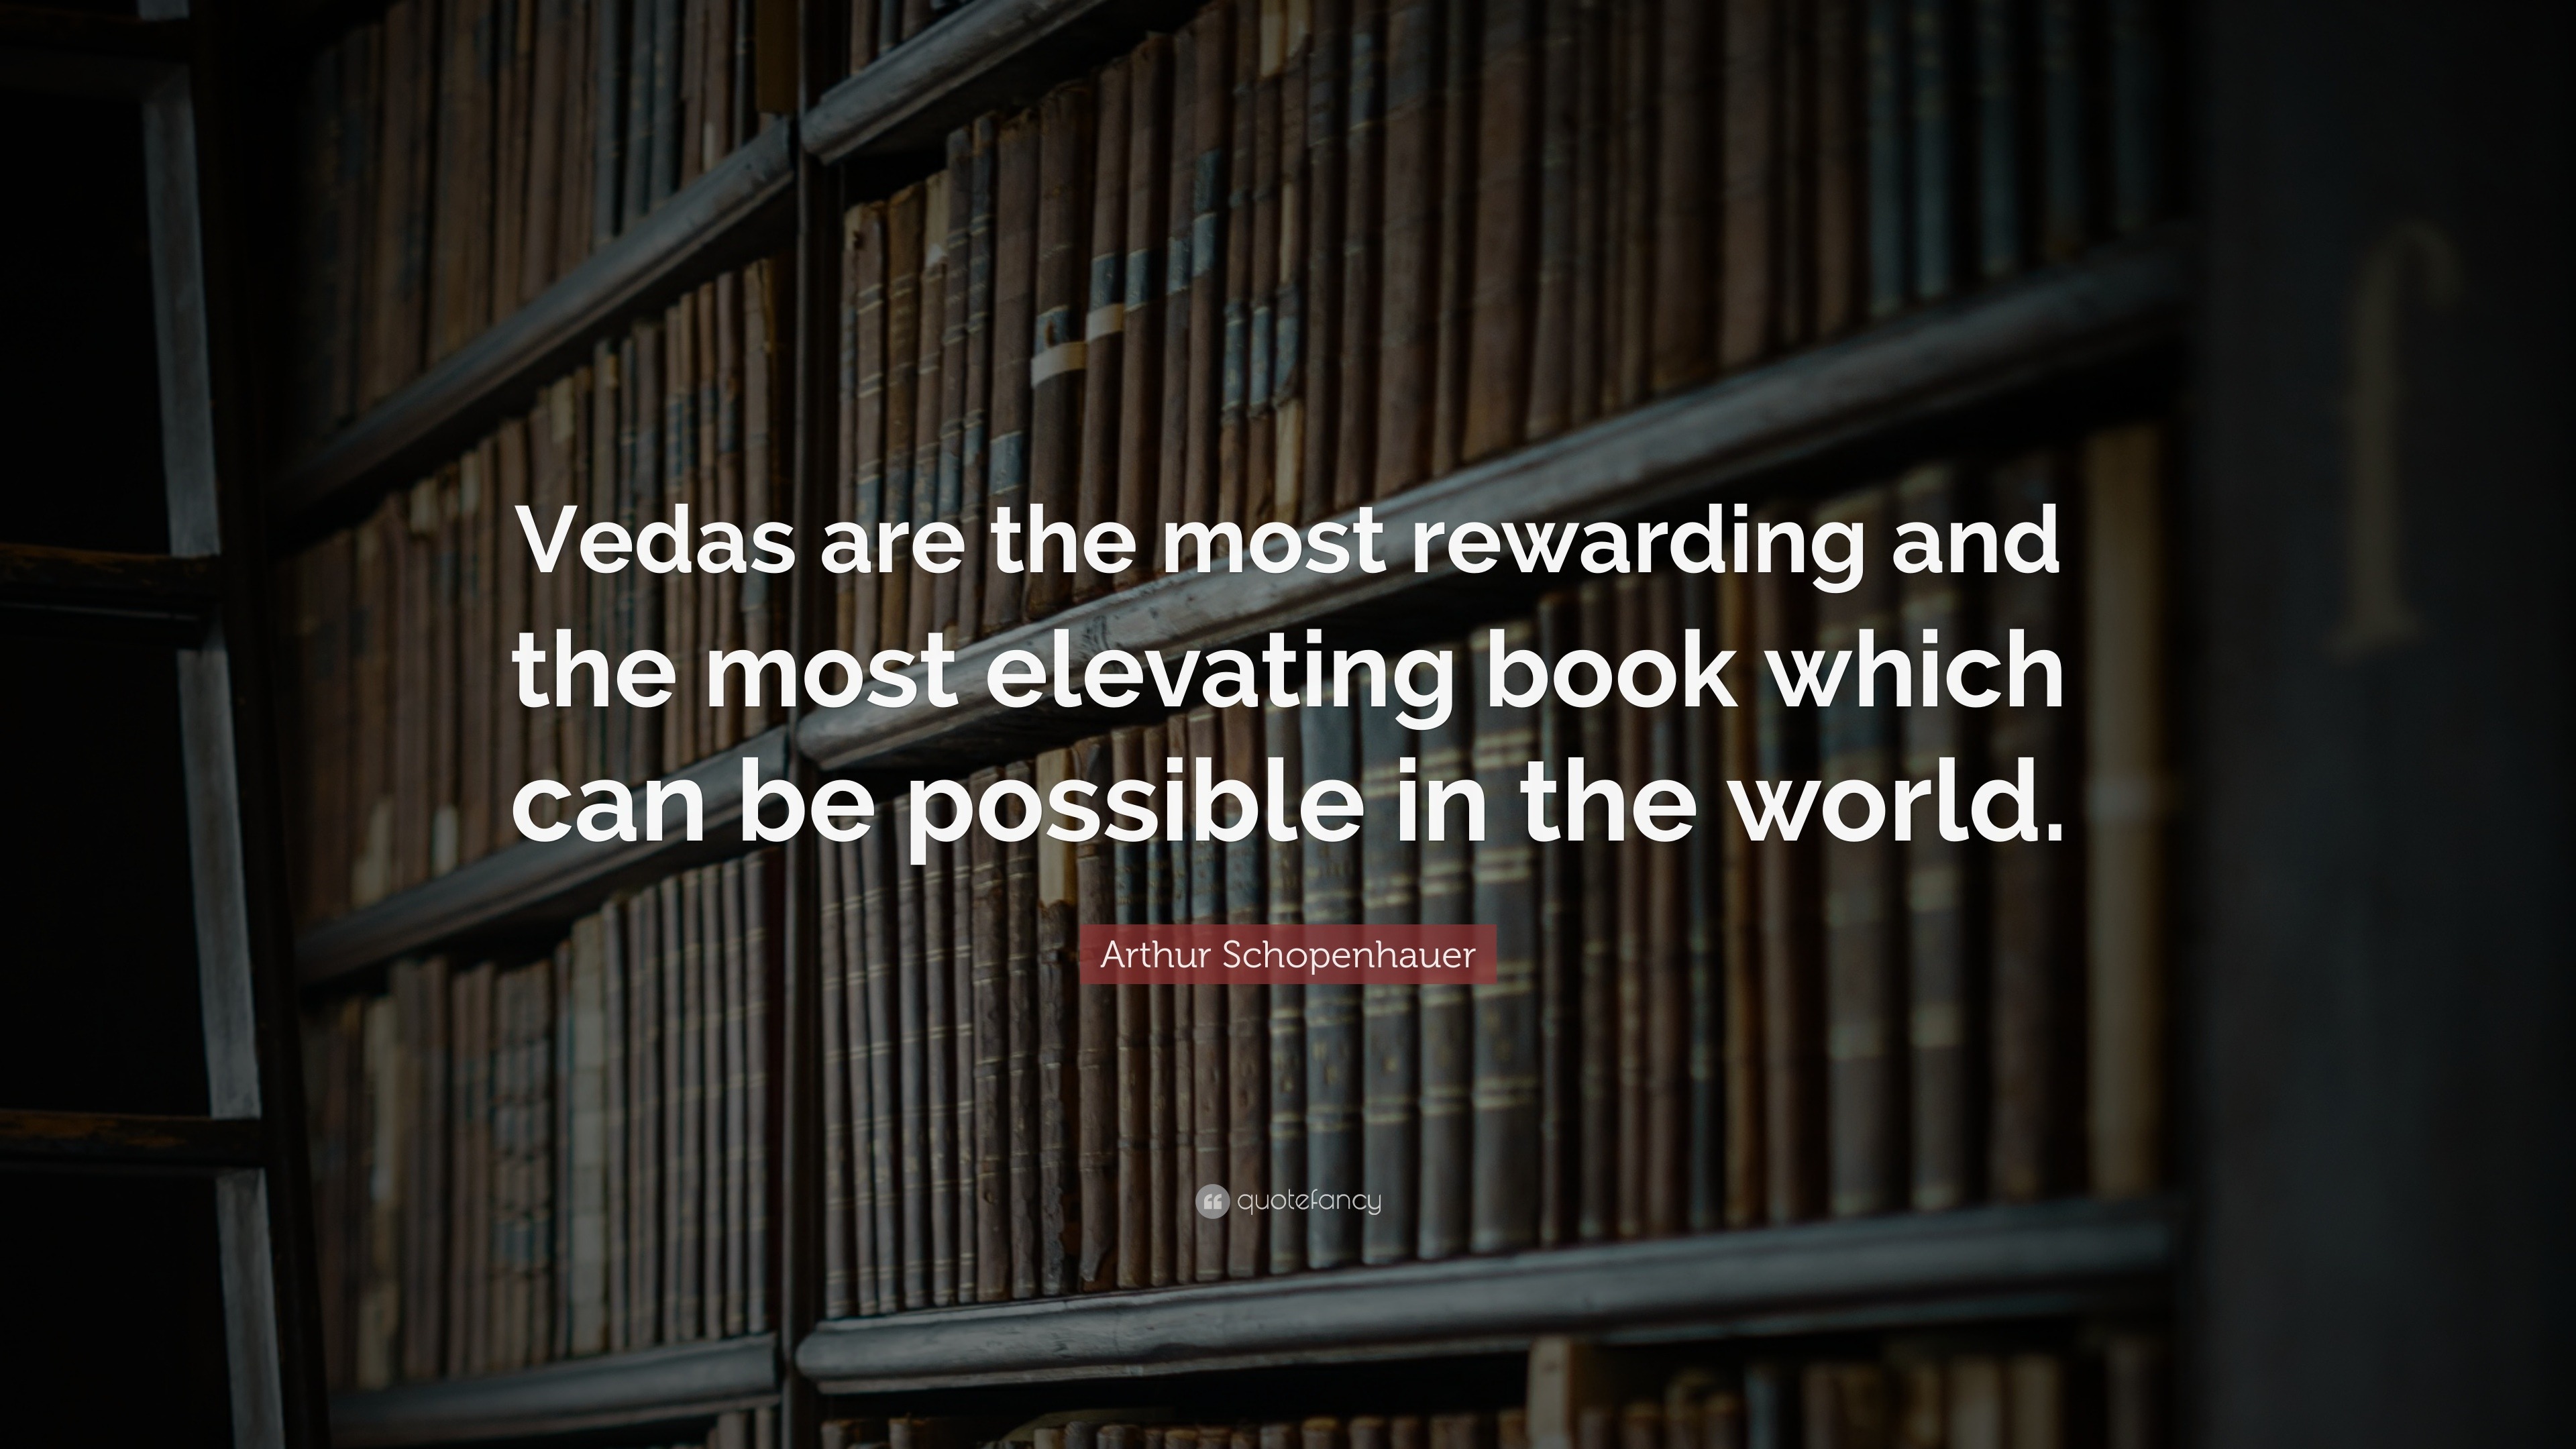 arthur schopenhauer quote: "vedas are the most rewarding and the